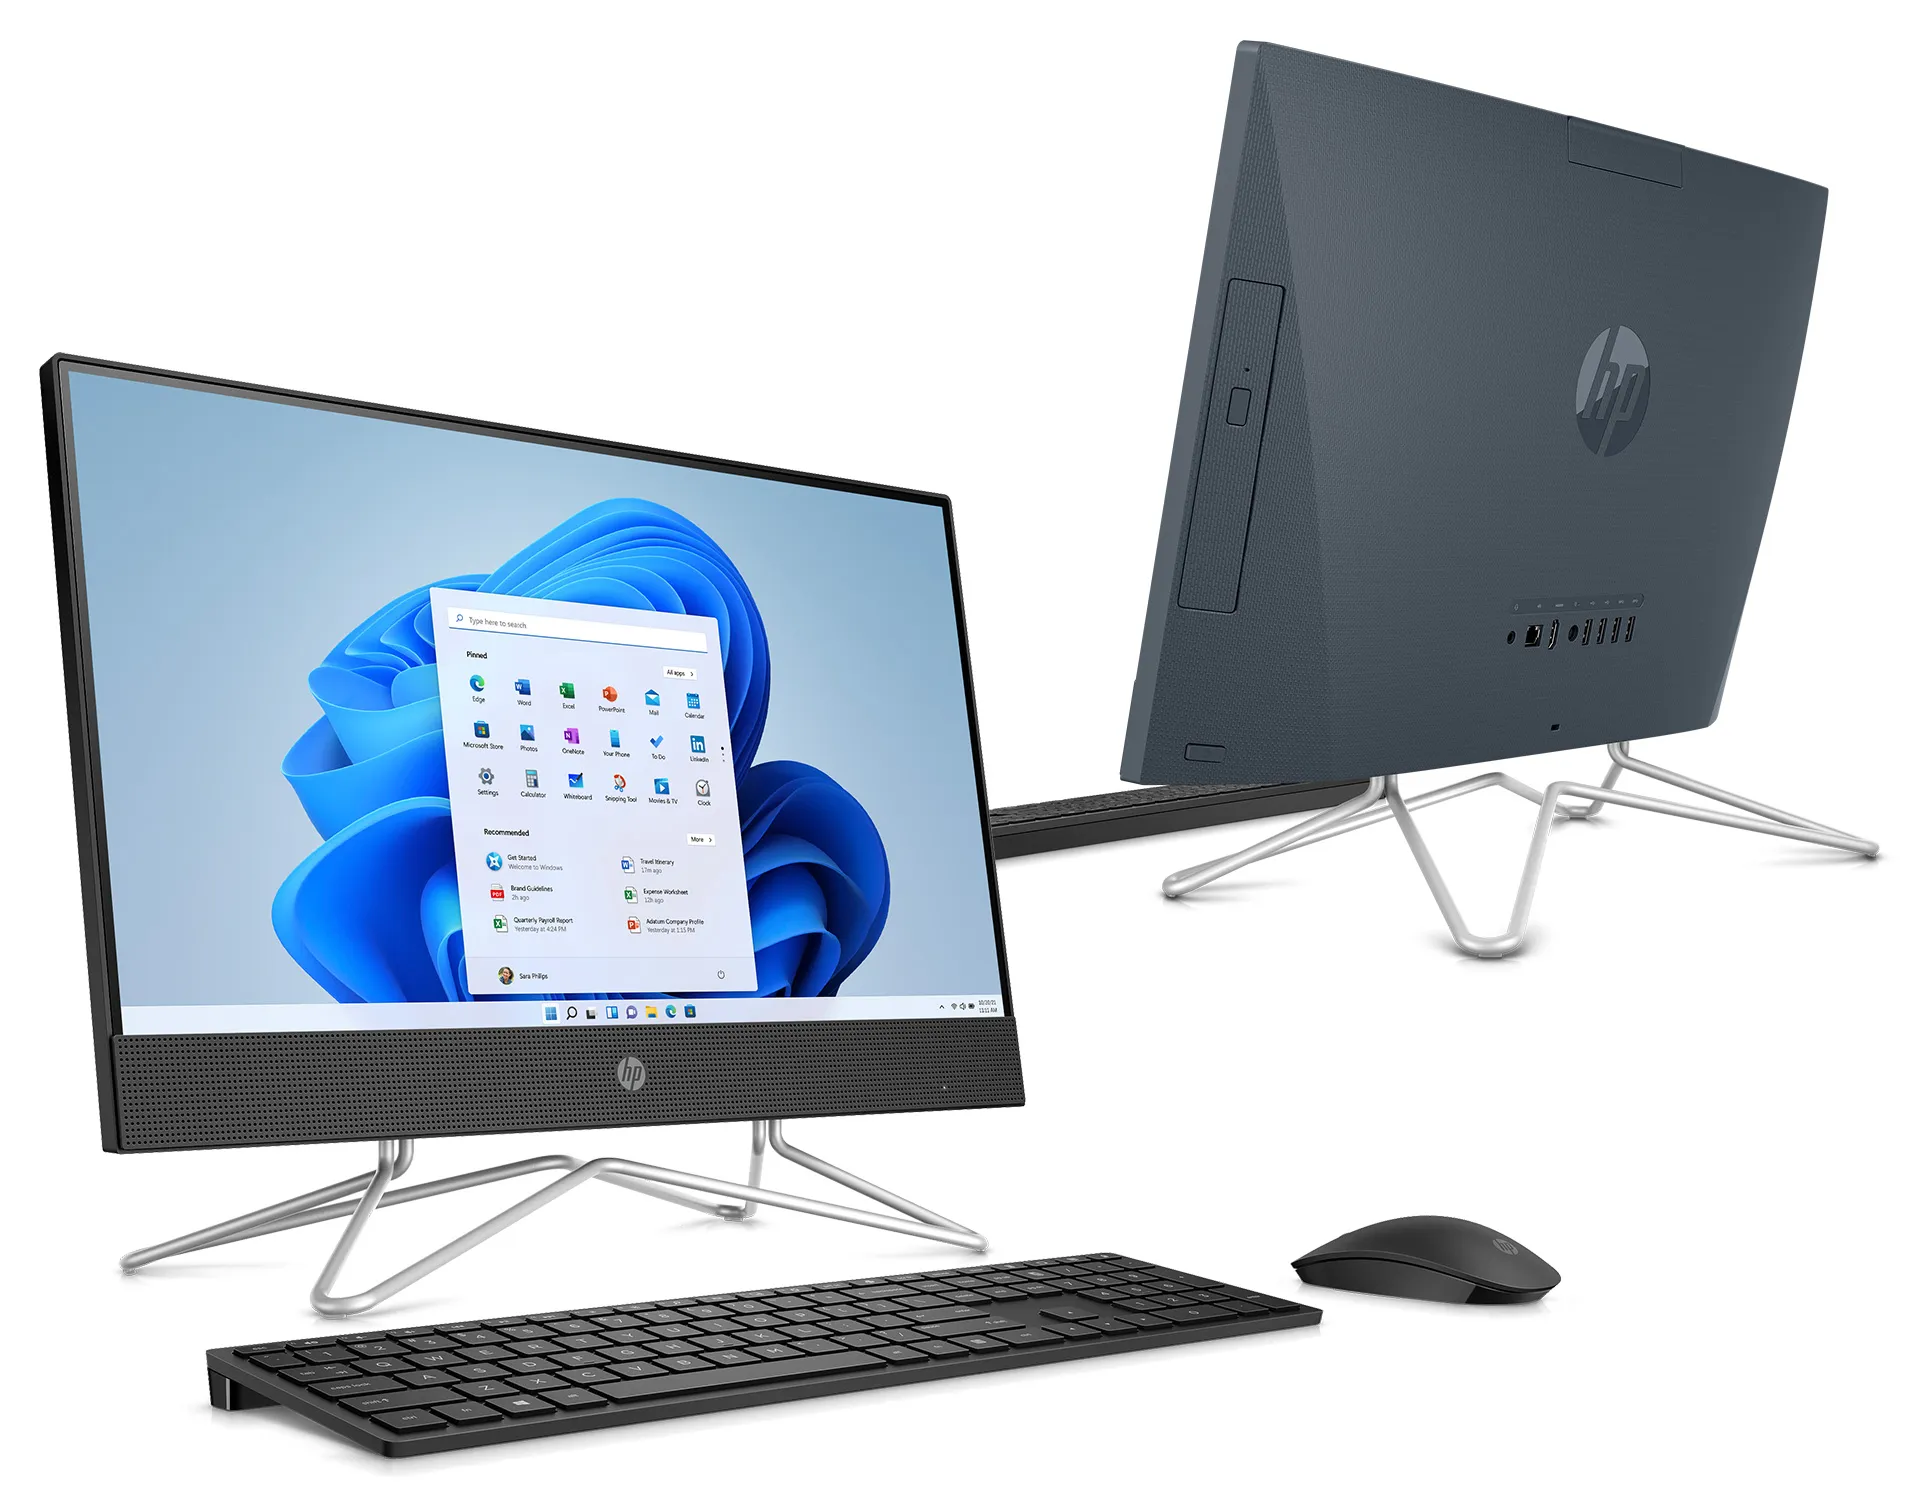 HP All-in-One 22-df（AMD） 製品詳細 - デスクトップパソコン | 日本HP